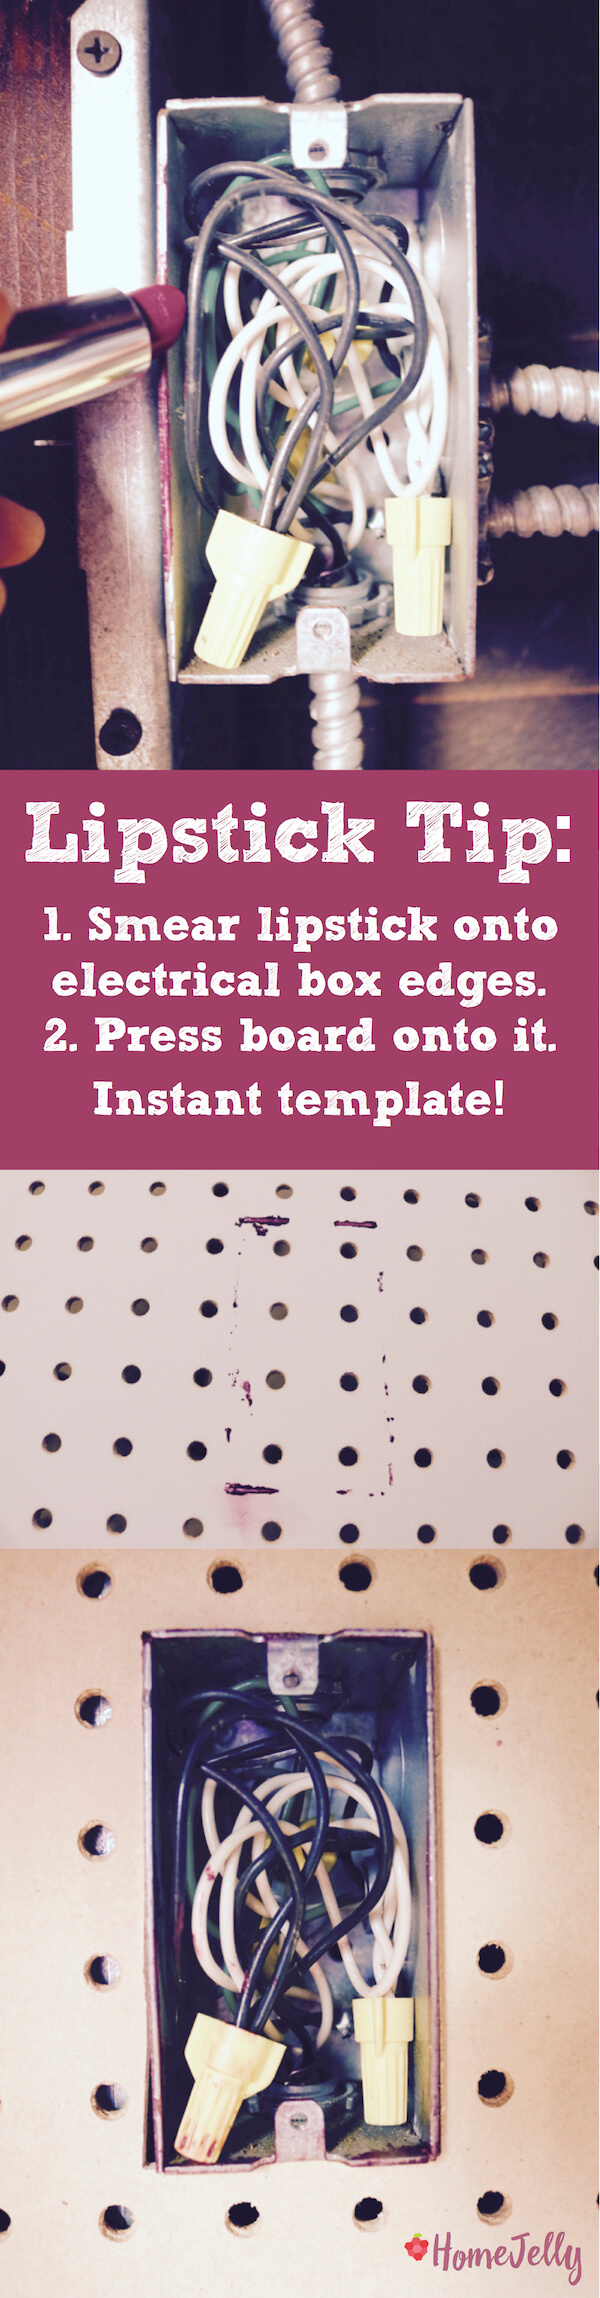 Lipstick tip makes nearly a perfect fit!